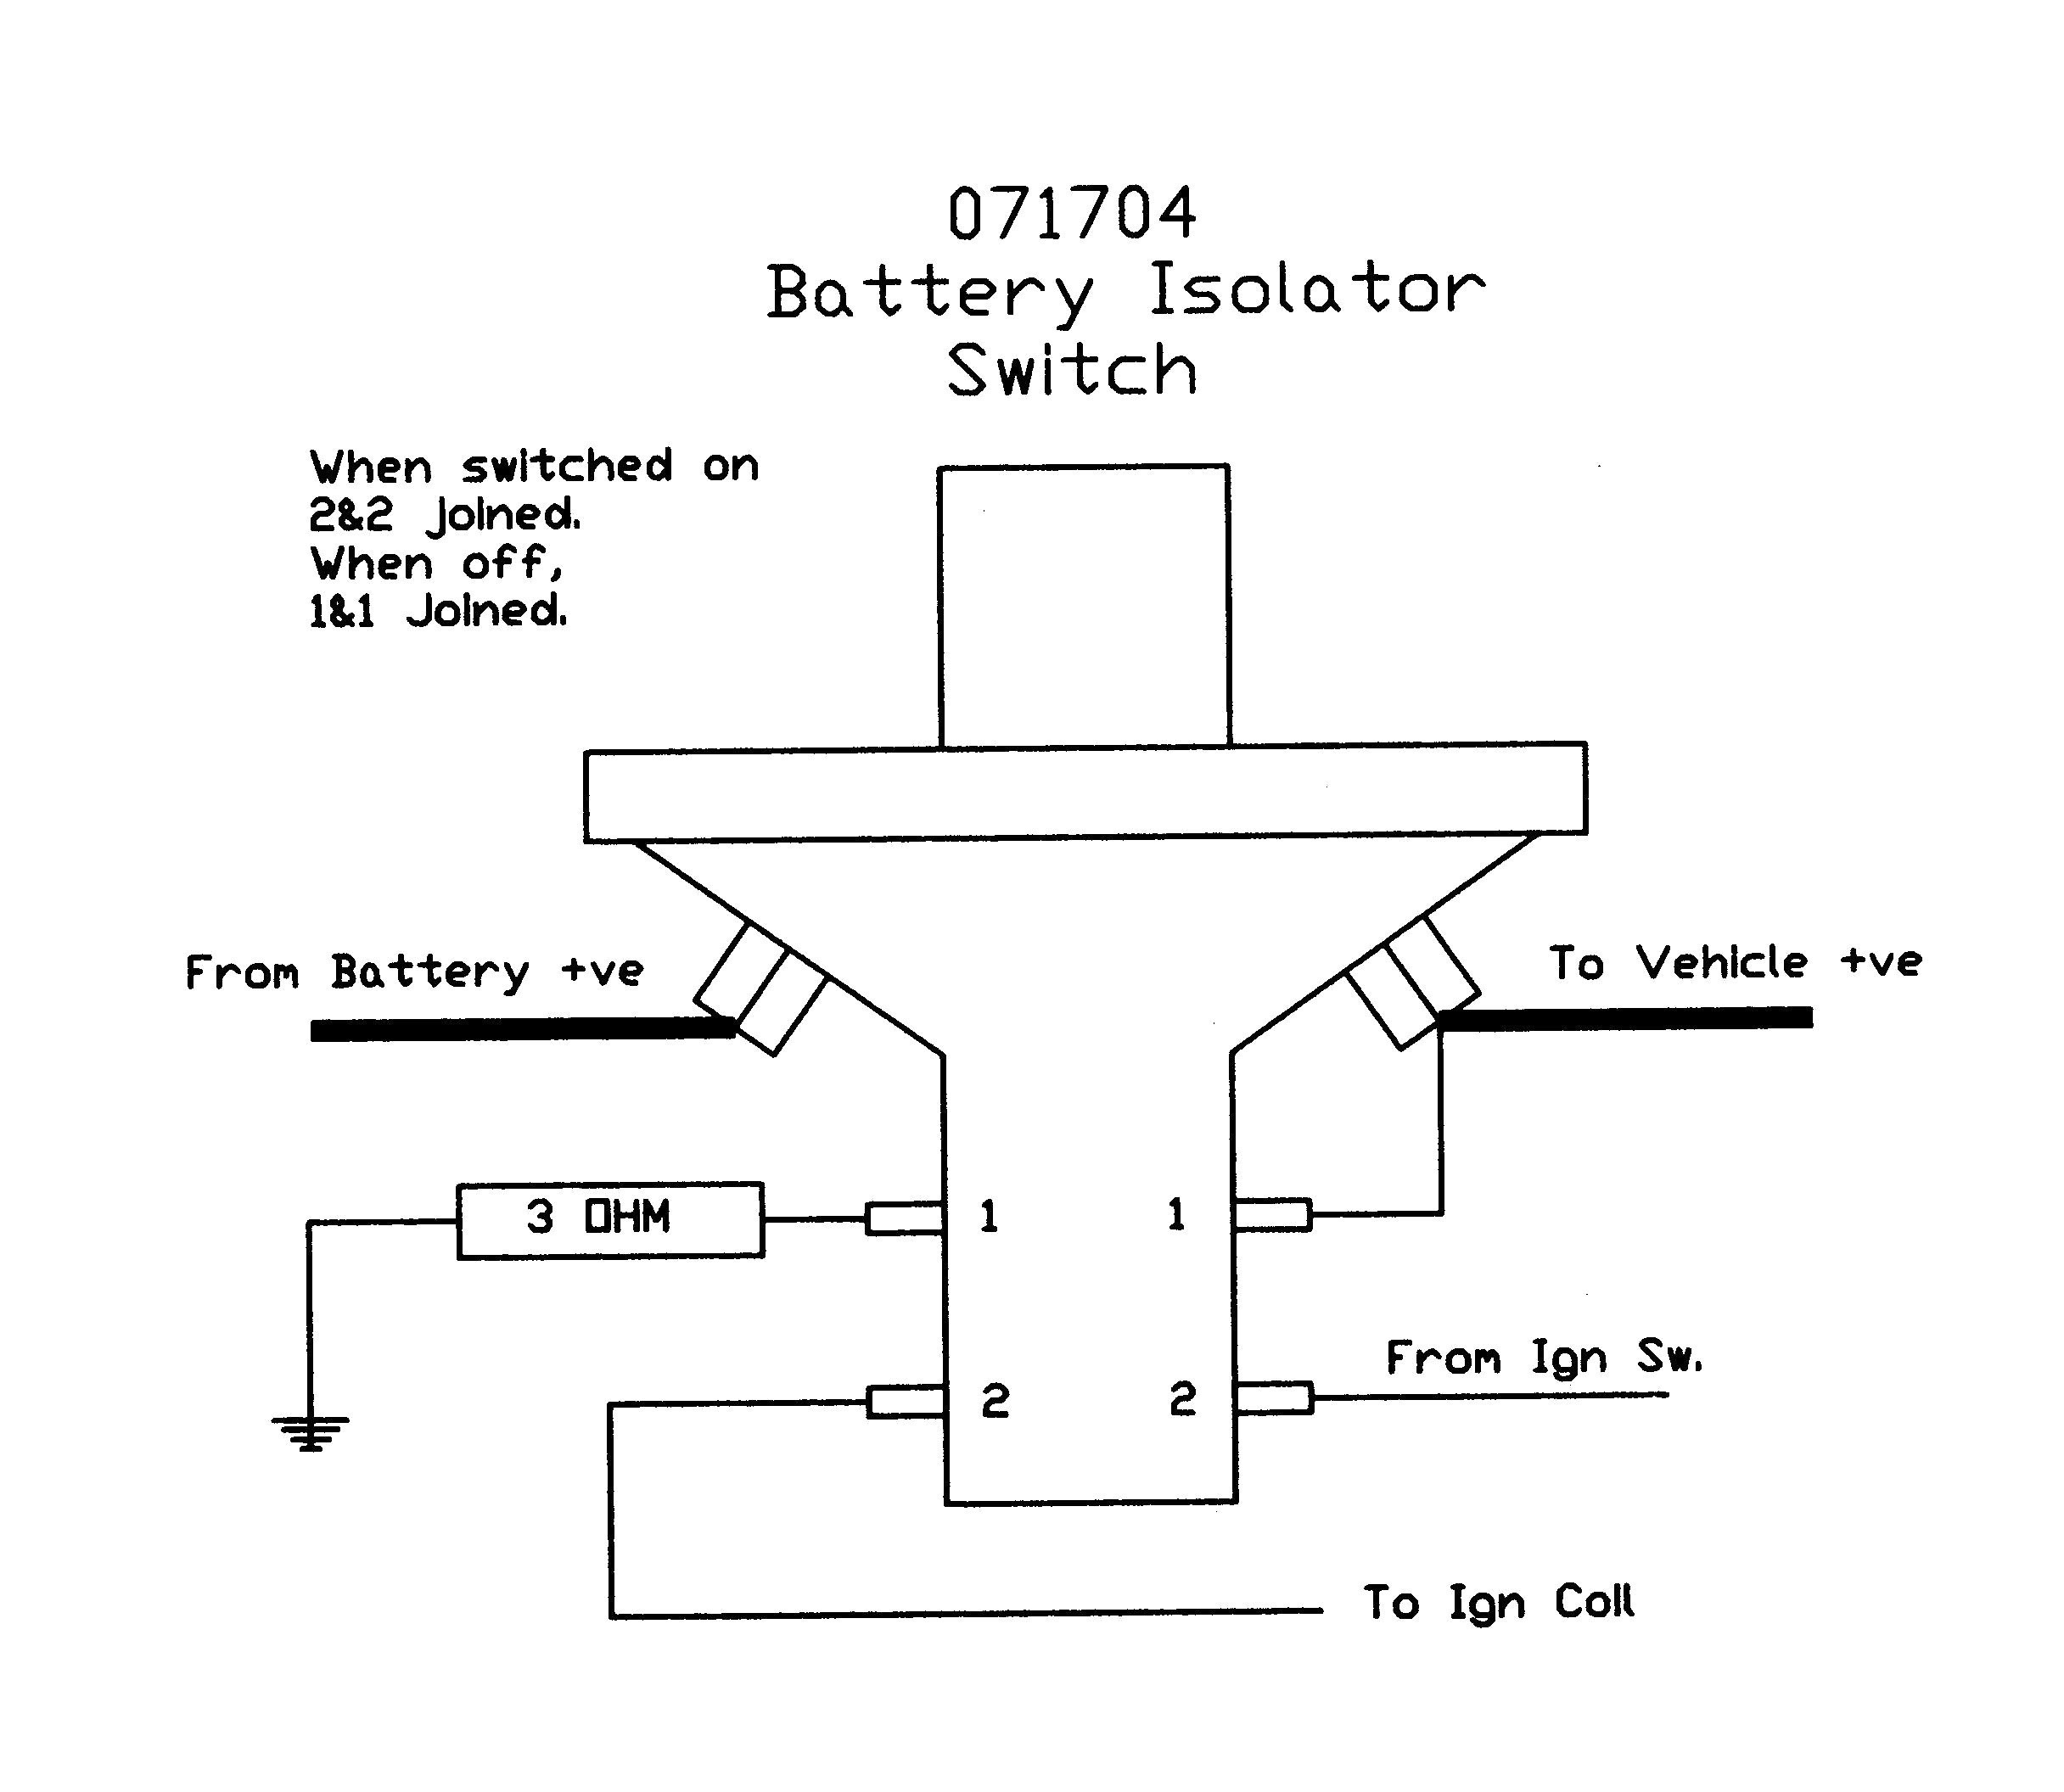 Rv Battery Disconnect Switch Wiring Diagram 3 Battery Boat Wiring Diagram Best Boat Battery Switch Wiring Of Rv Battery Disconnect Switch Wiring Diagram